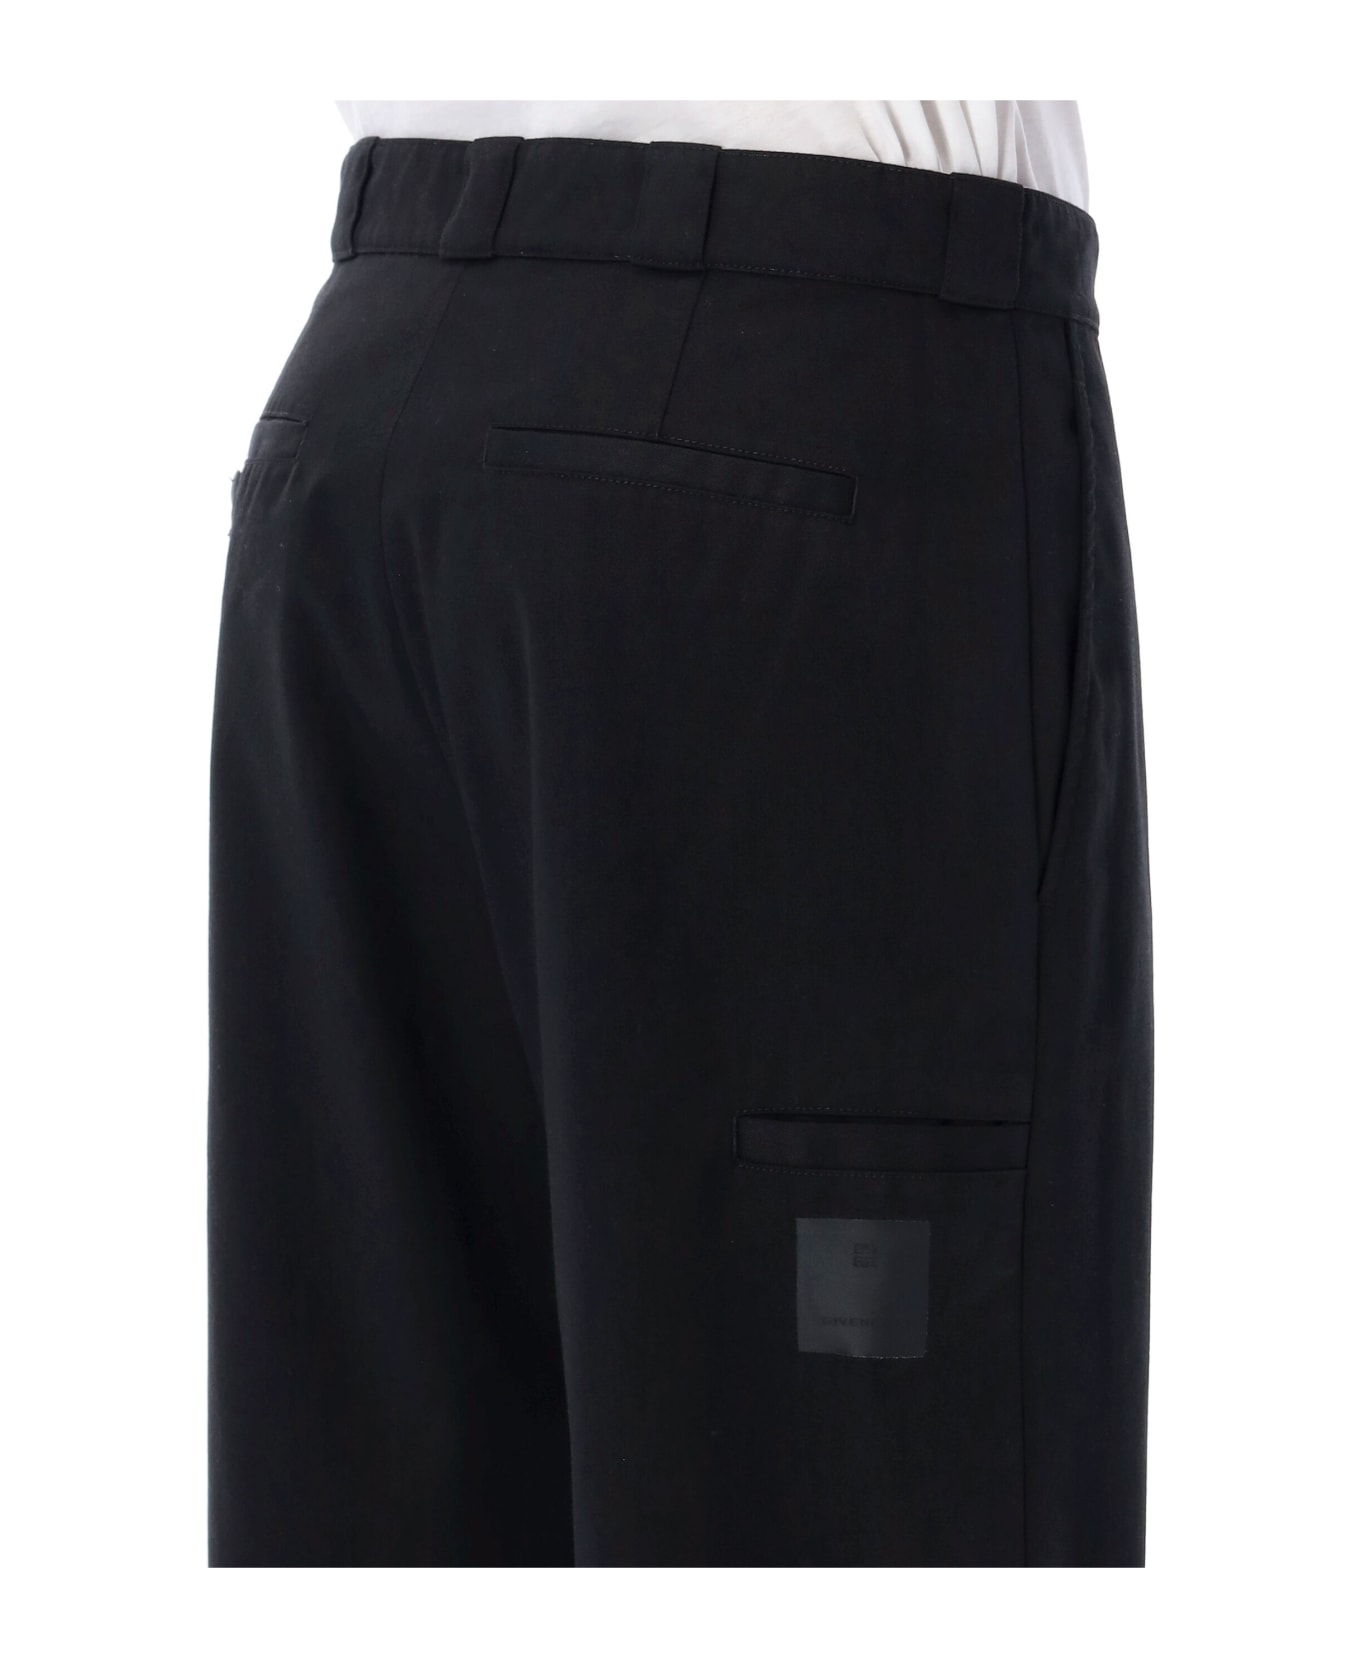 Givenchy Casual Unstiched Pant - Black